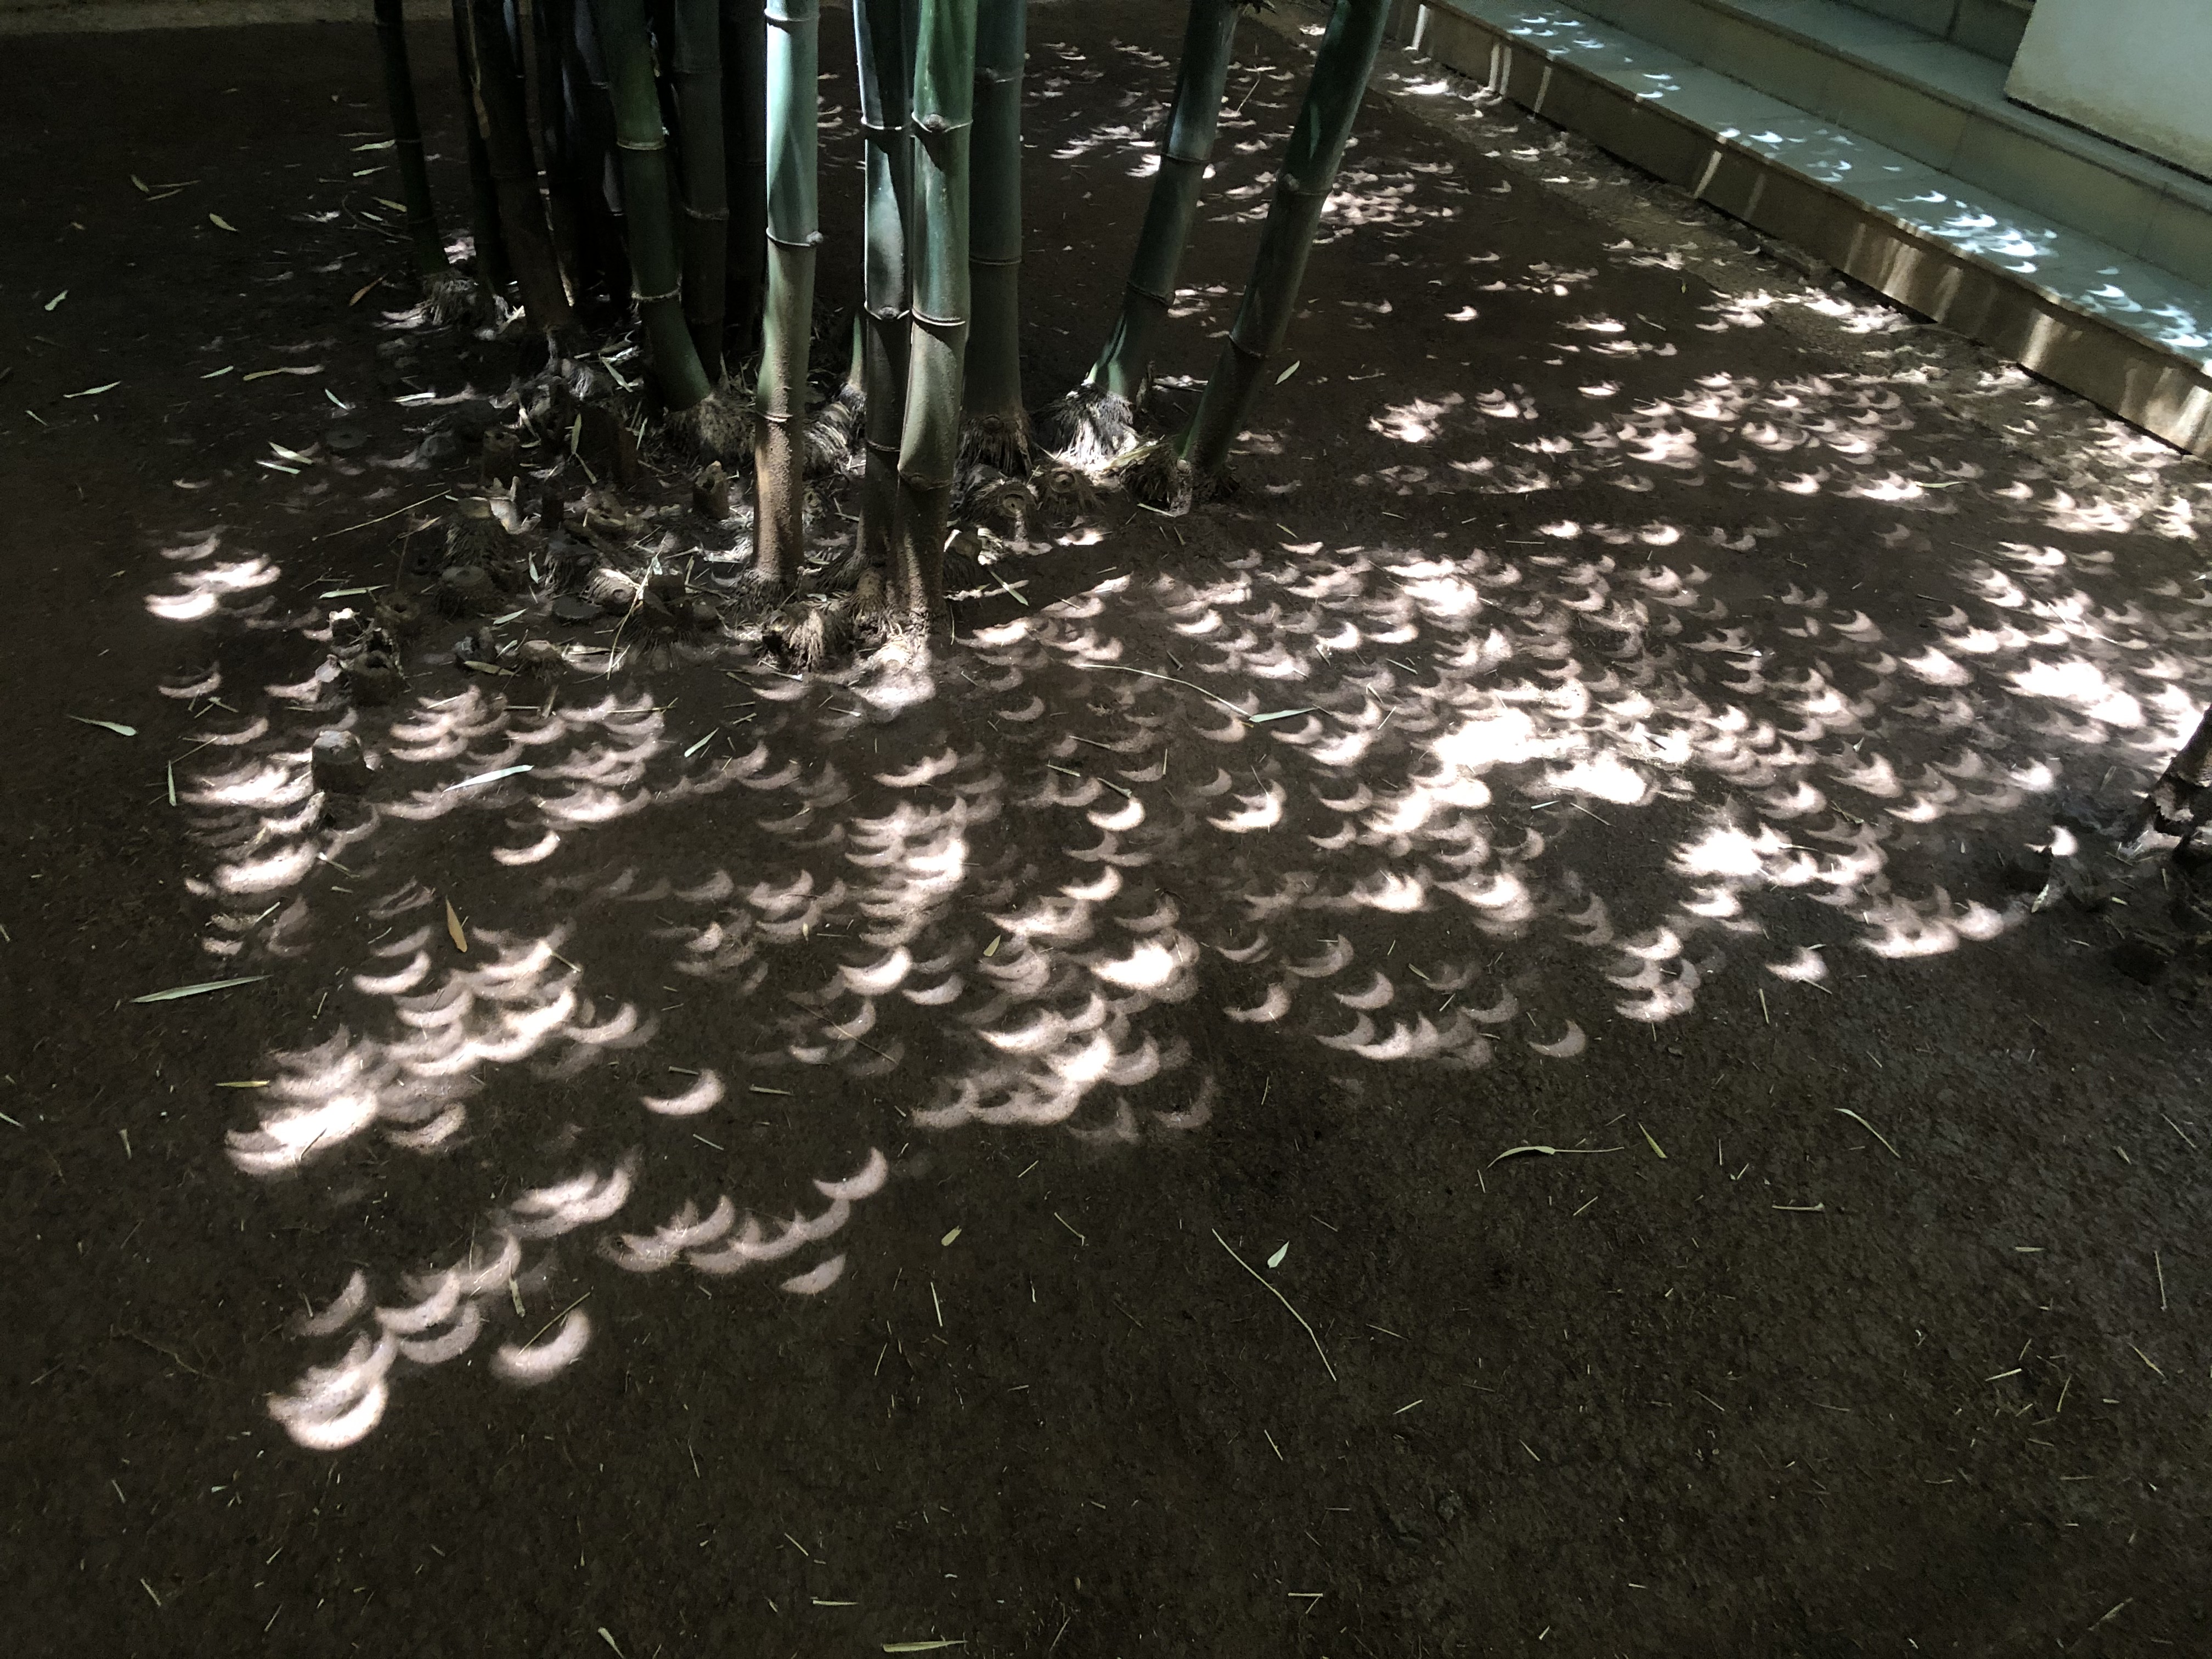 Eclipse under the Bamboo